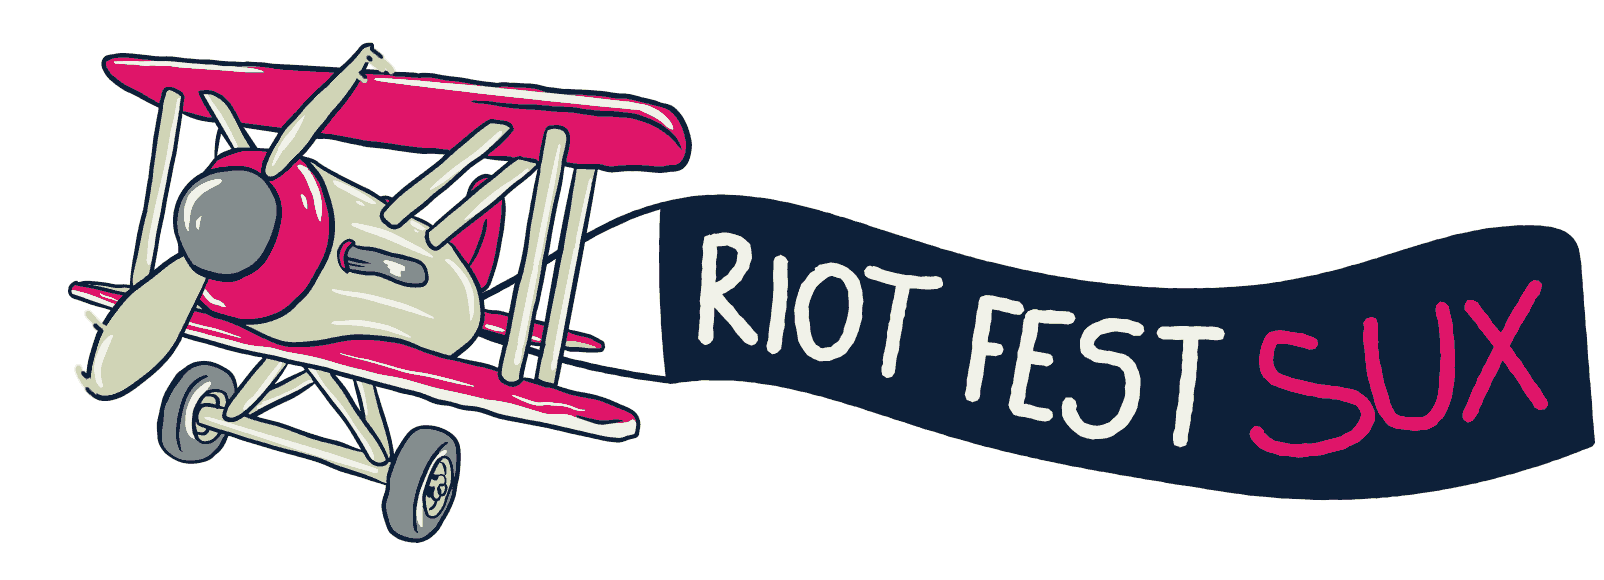 Riot Fest suuuuuuuuuux airplane with a banner that says "Riot Fest S-U-X"